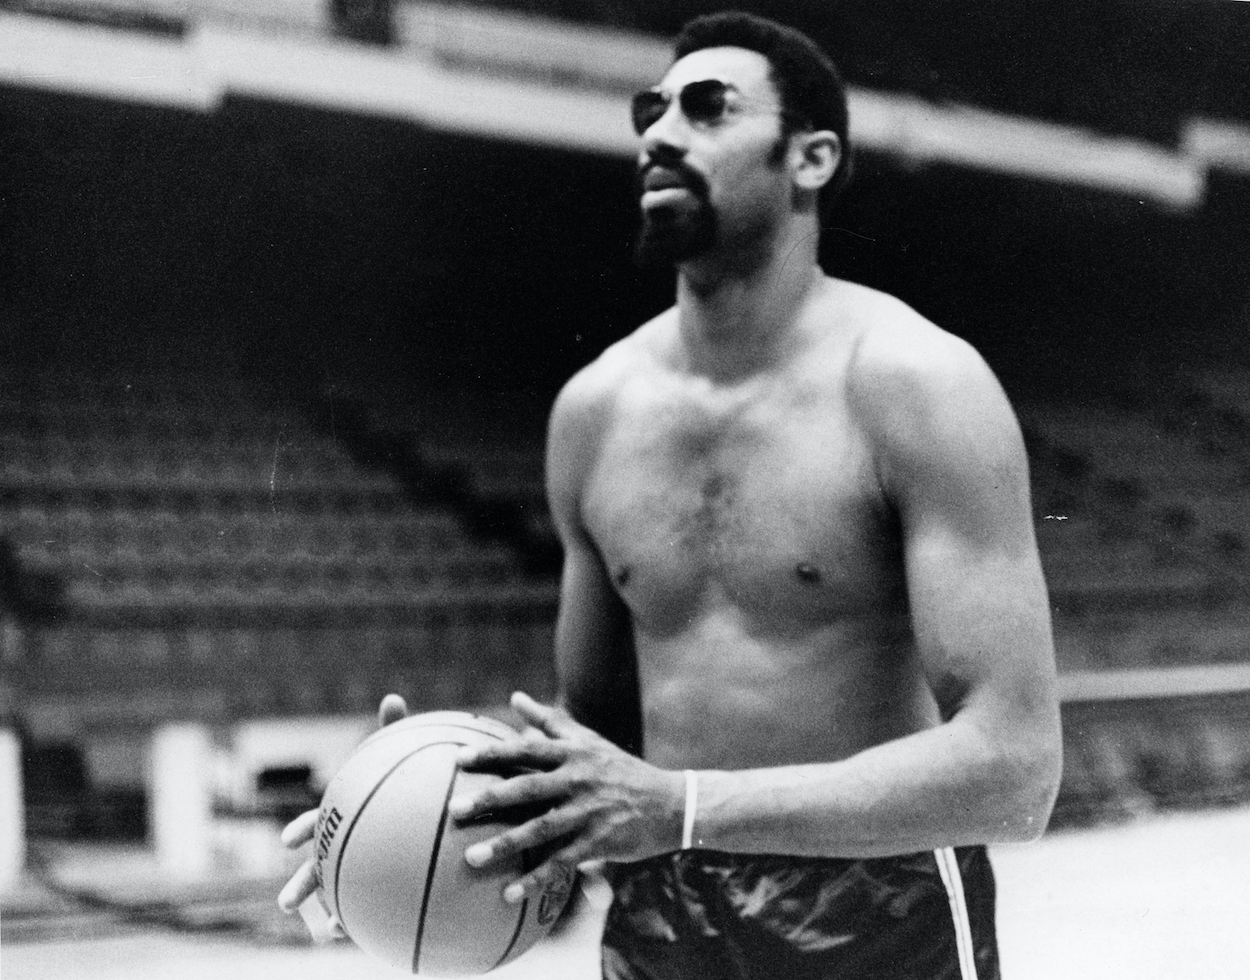 wilt-chamberlain-owes-his-100-point-game-to-a-hangover-and-some